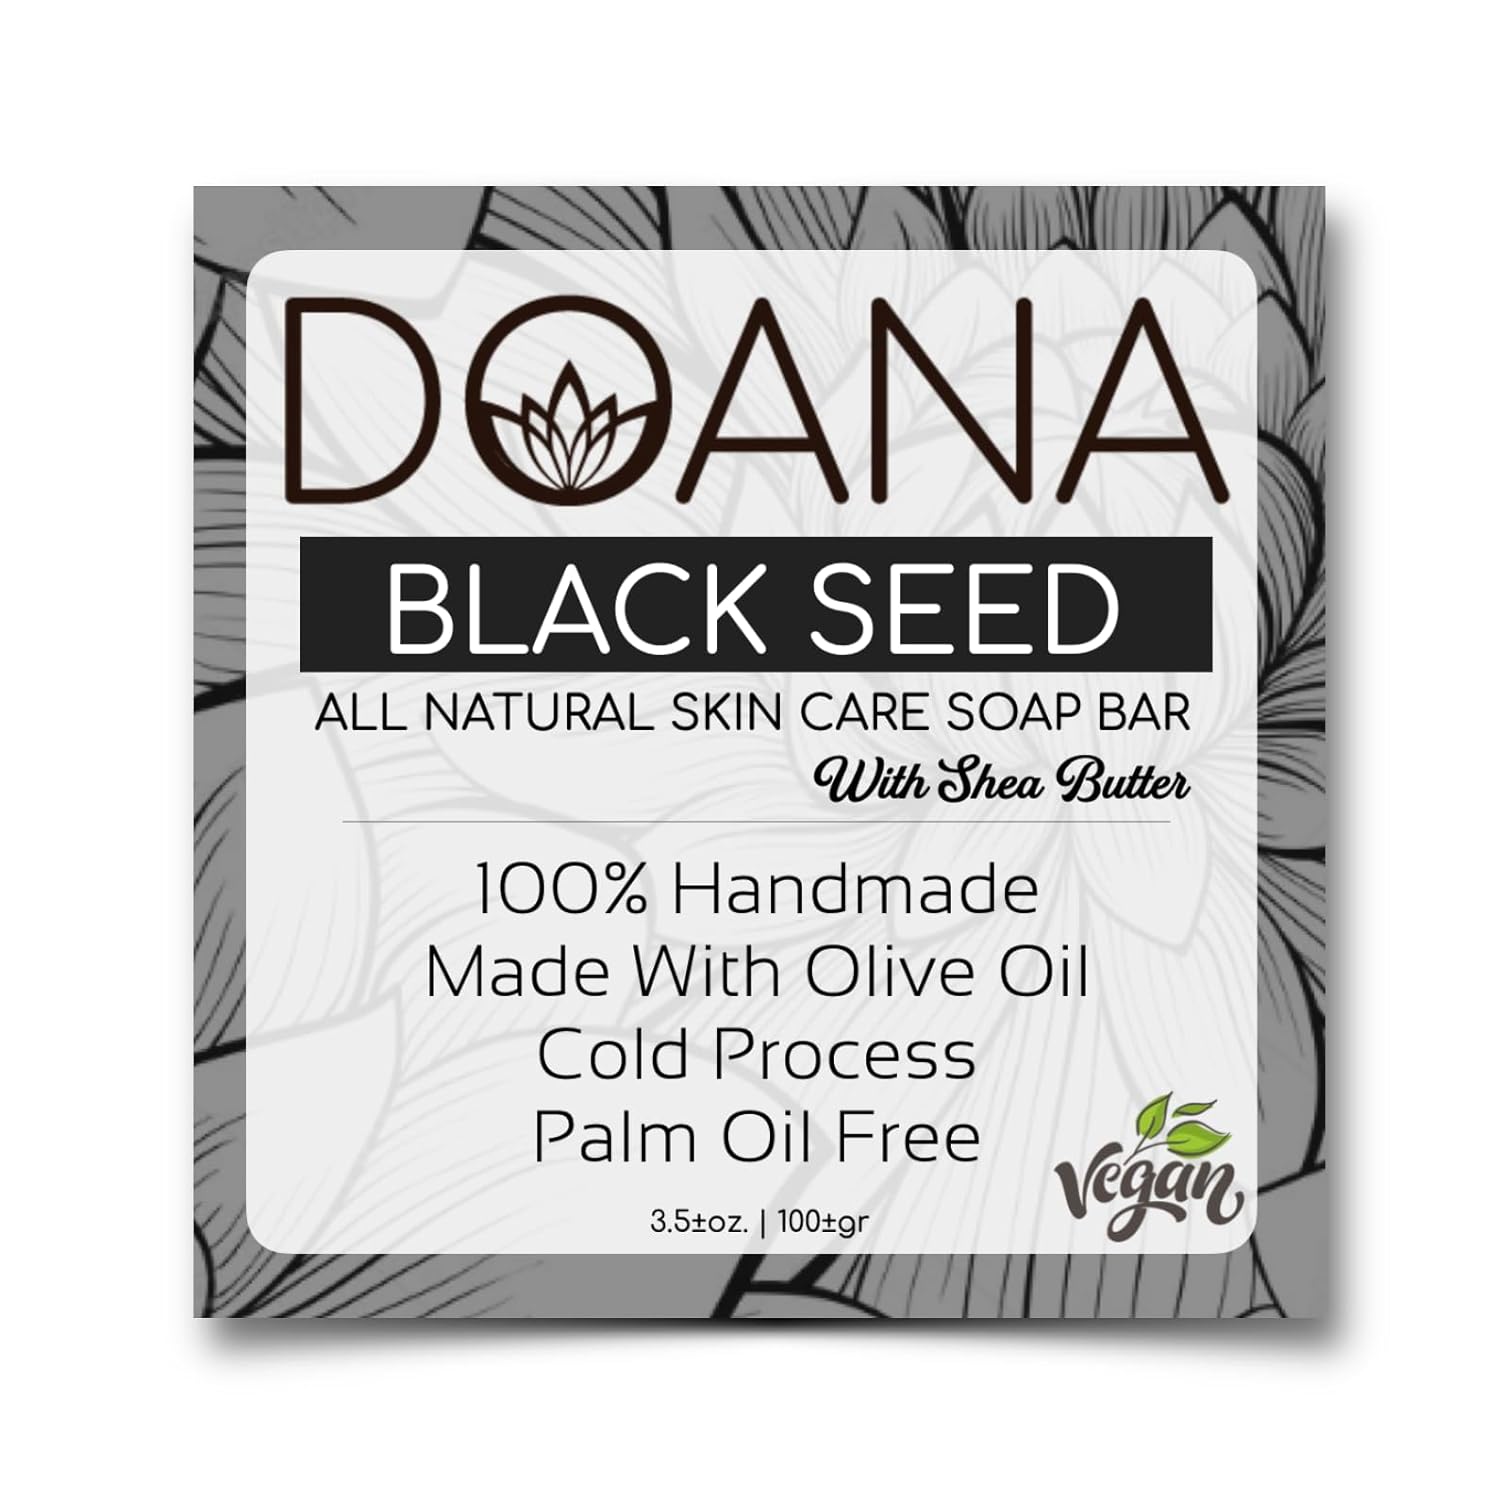 Black Seed (Cumin) Soap Bar - Now With SHEA BUTTER - Vegan, Olive Oil and Coconut Oil, Palm Oil Free, Antiseptic, Anti Bacterial, For Sensitive - Dry Skin, Prevents Unwanted Odors, Foot Care